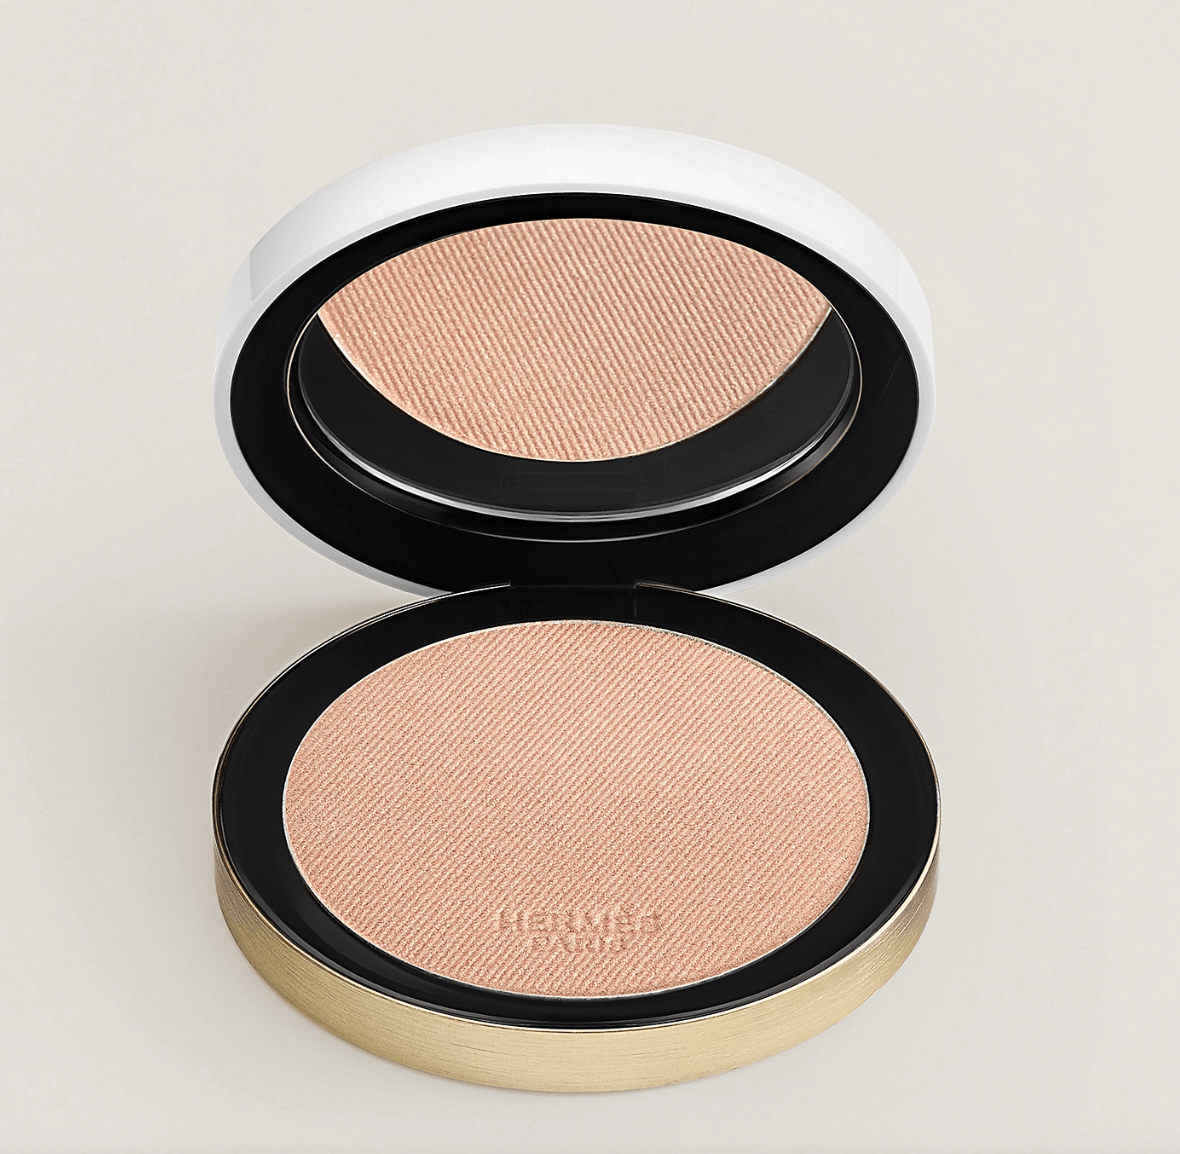 Hermès’ glow powder Mirage completes a perfect holiday makeup look